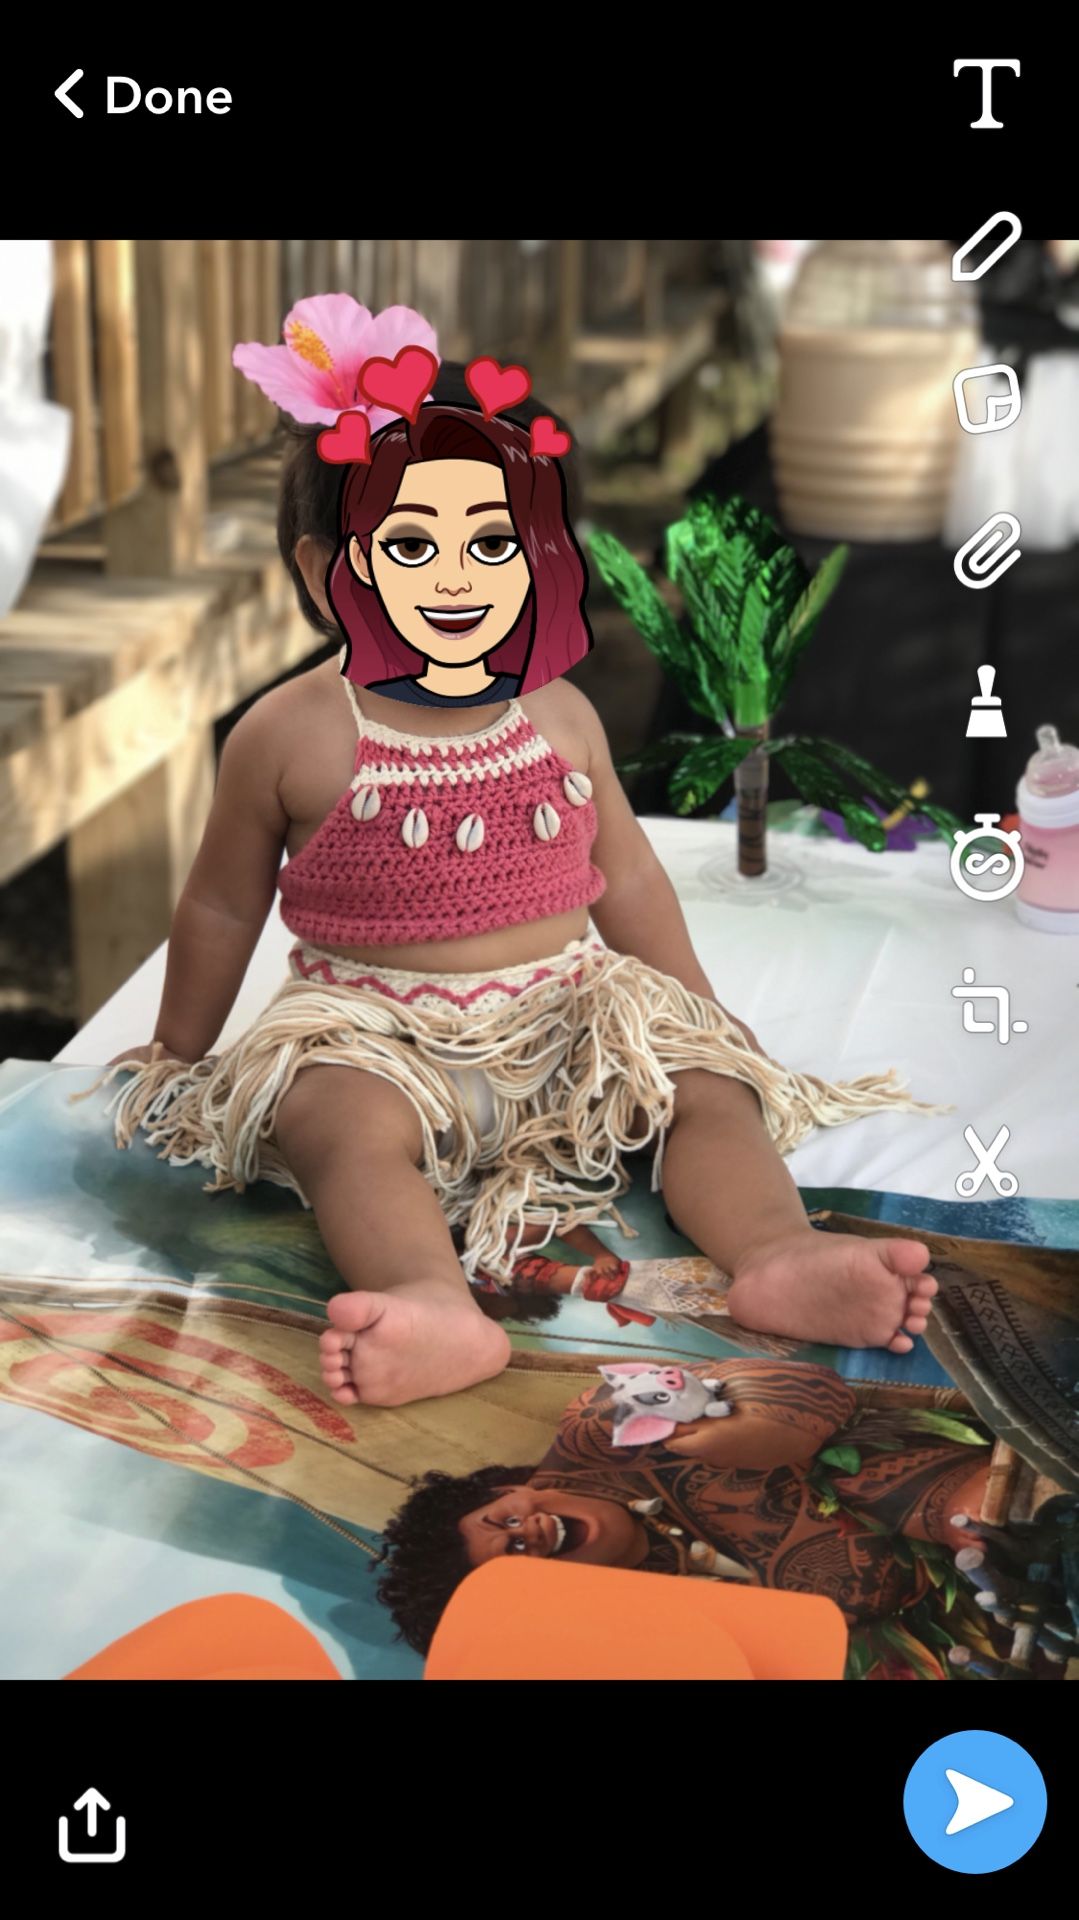 Moana outfit / costume